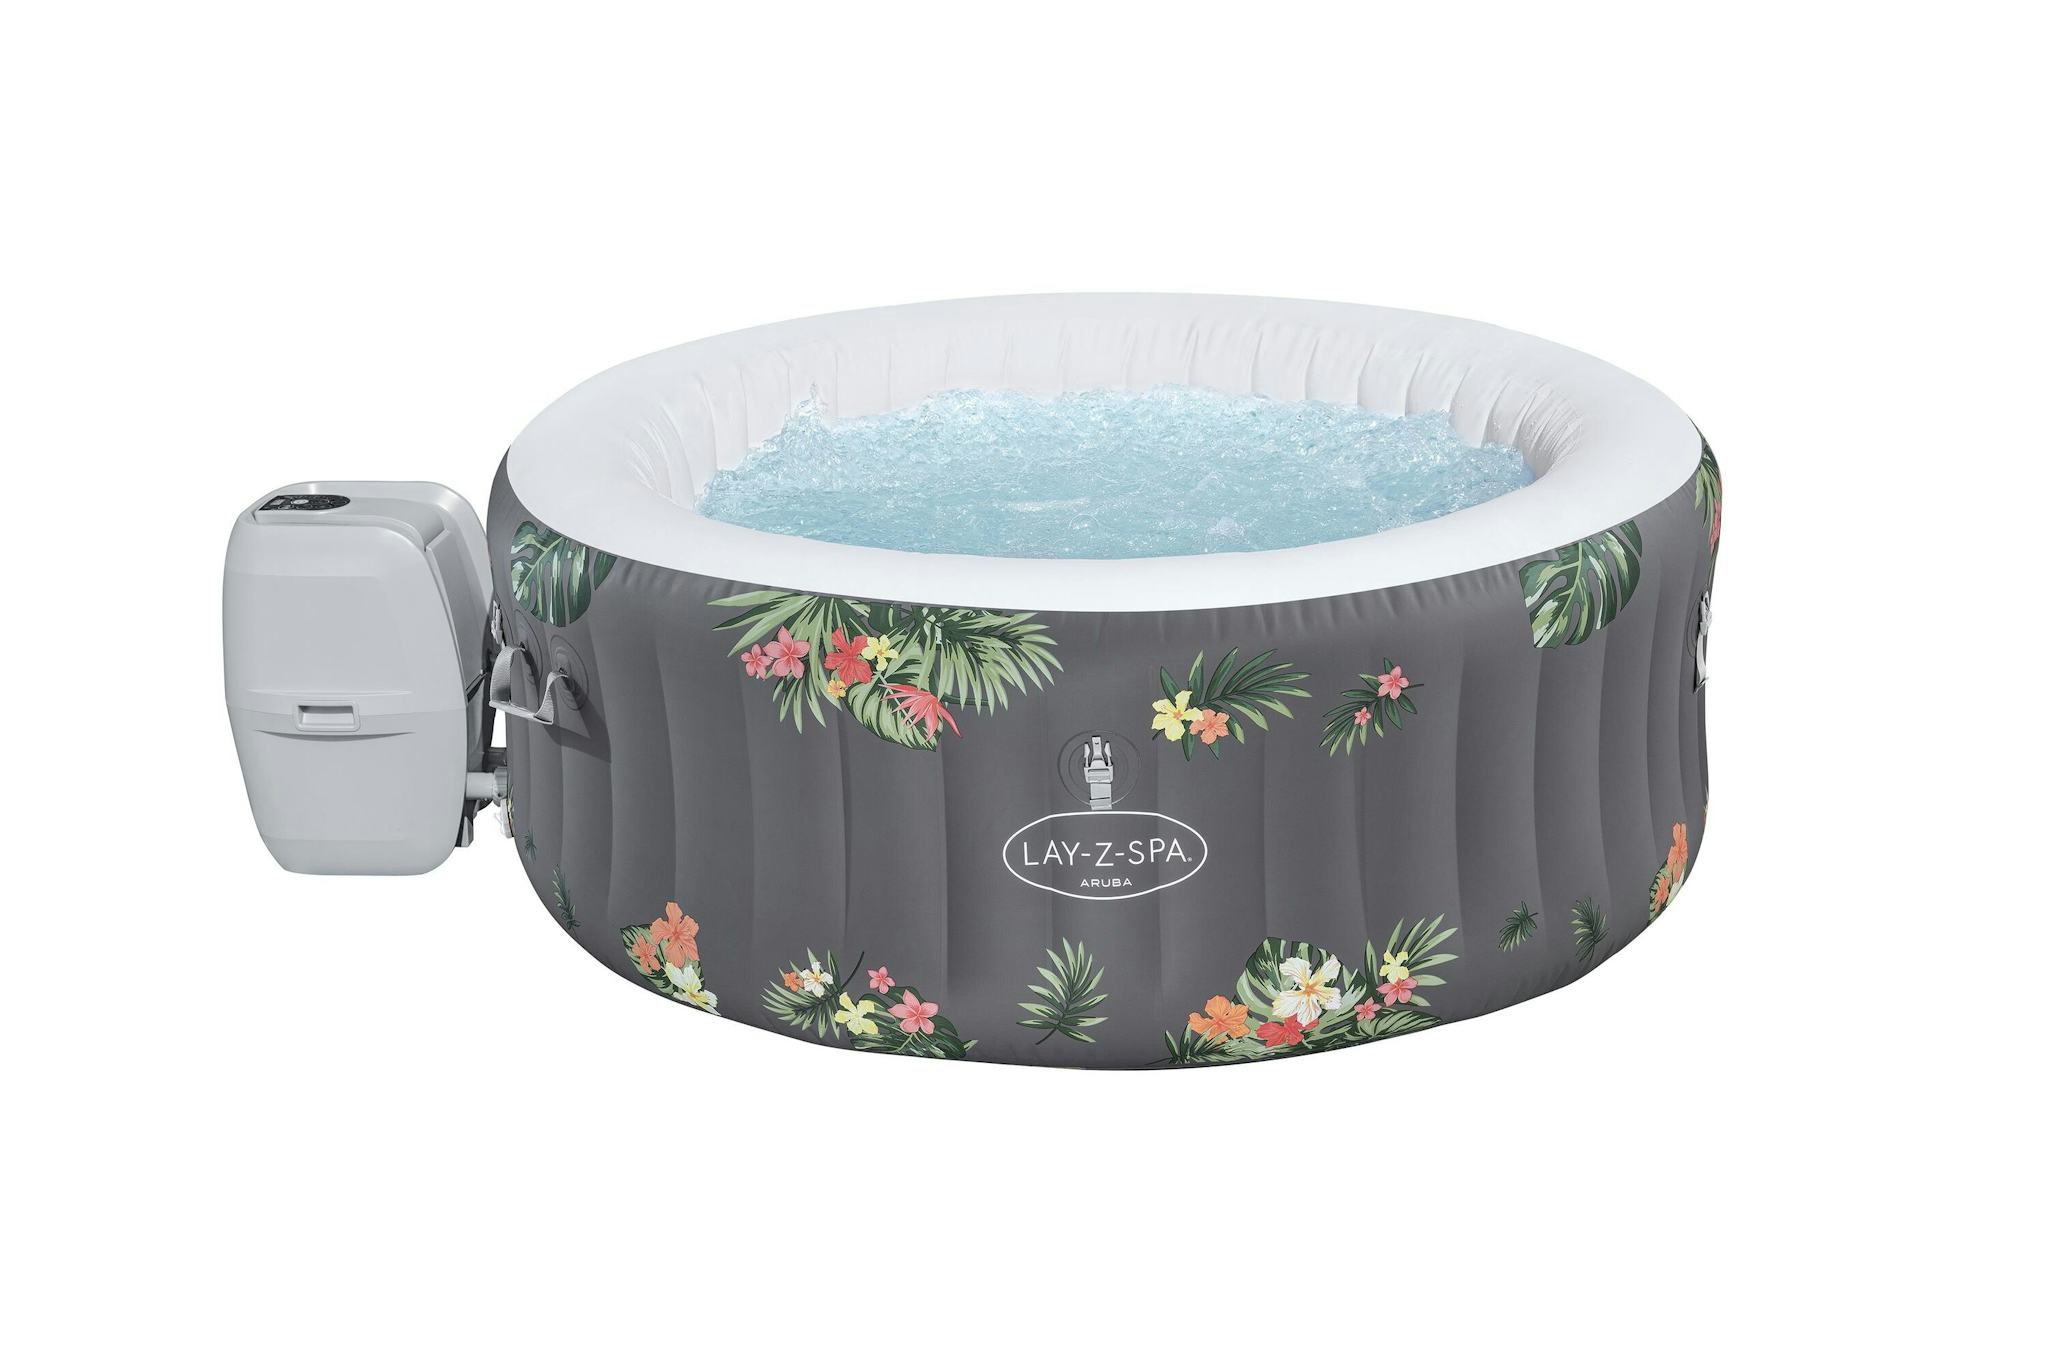 Spas Gonflables Spa gonflable rond Lay-Z-Spa Aruba Airjet™ 2 - 3 personnes Bestway 26